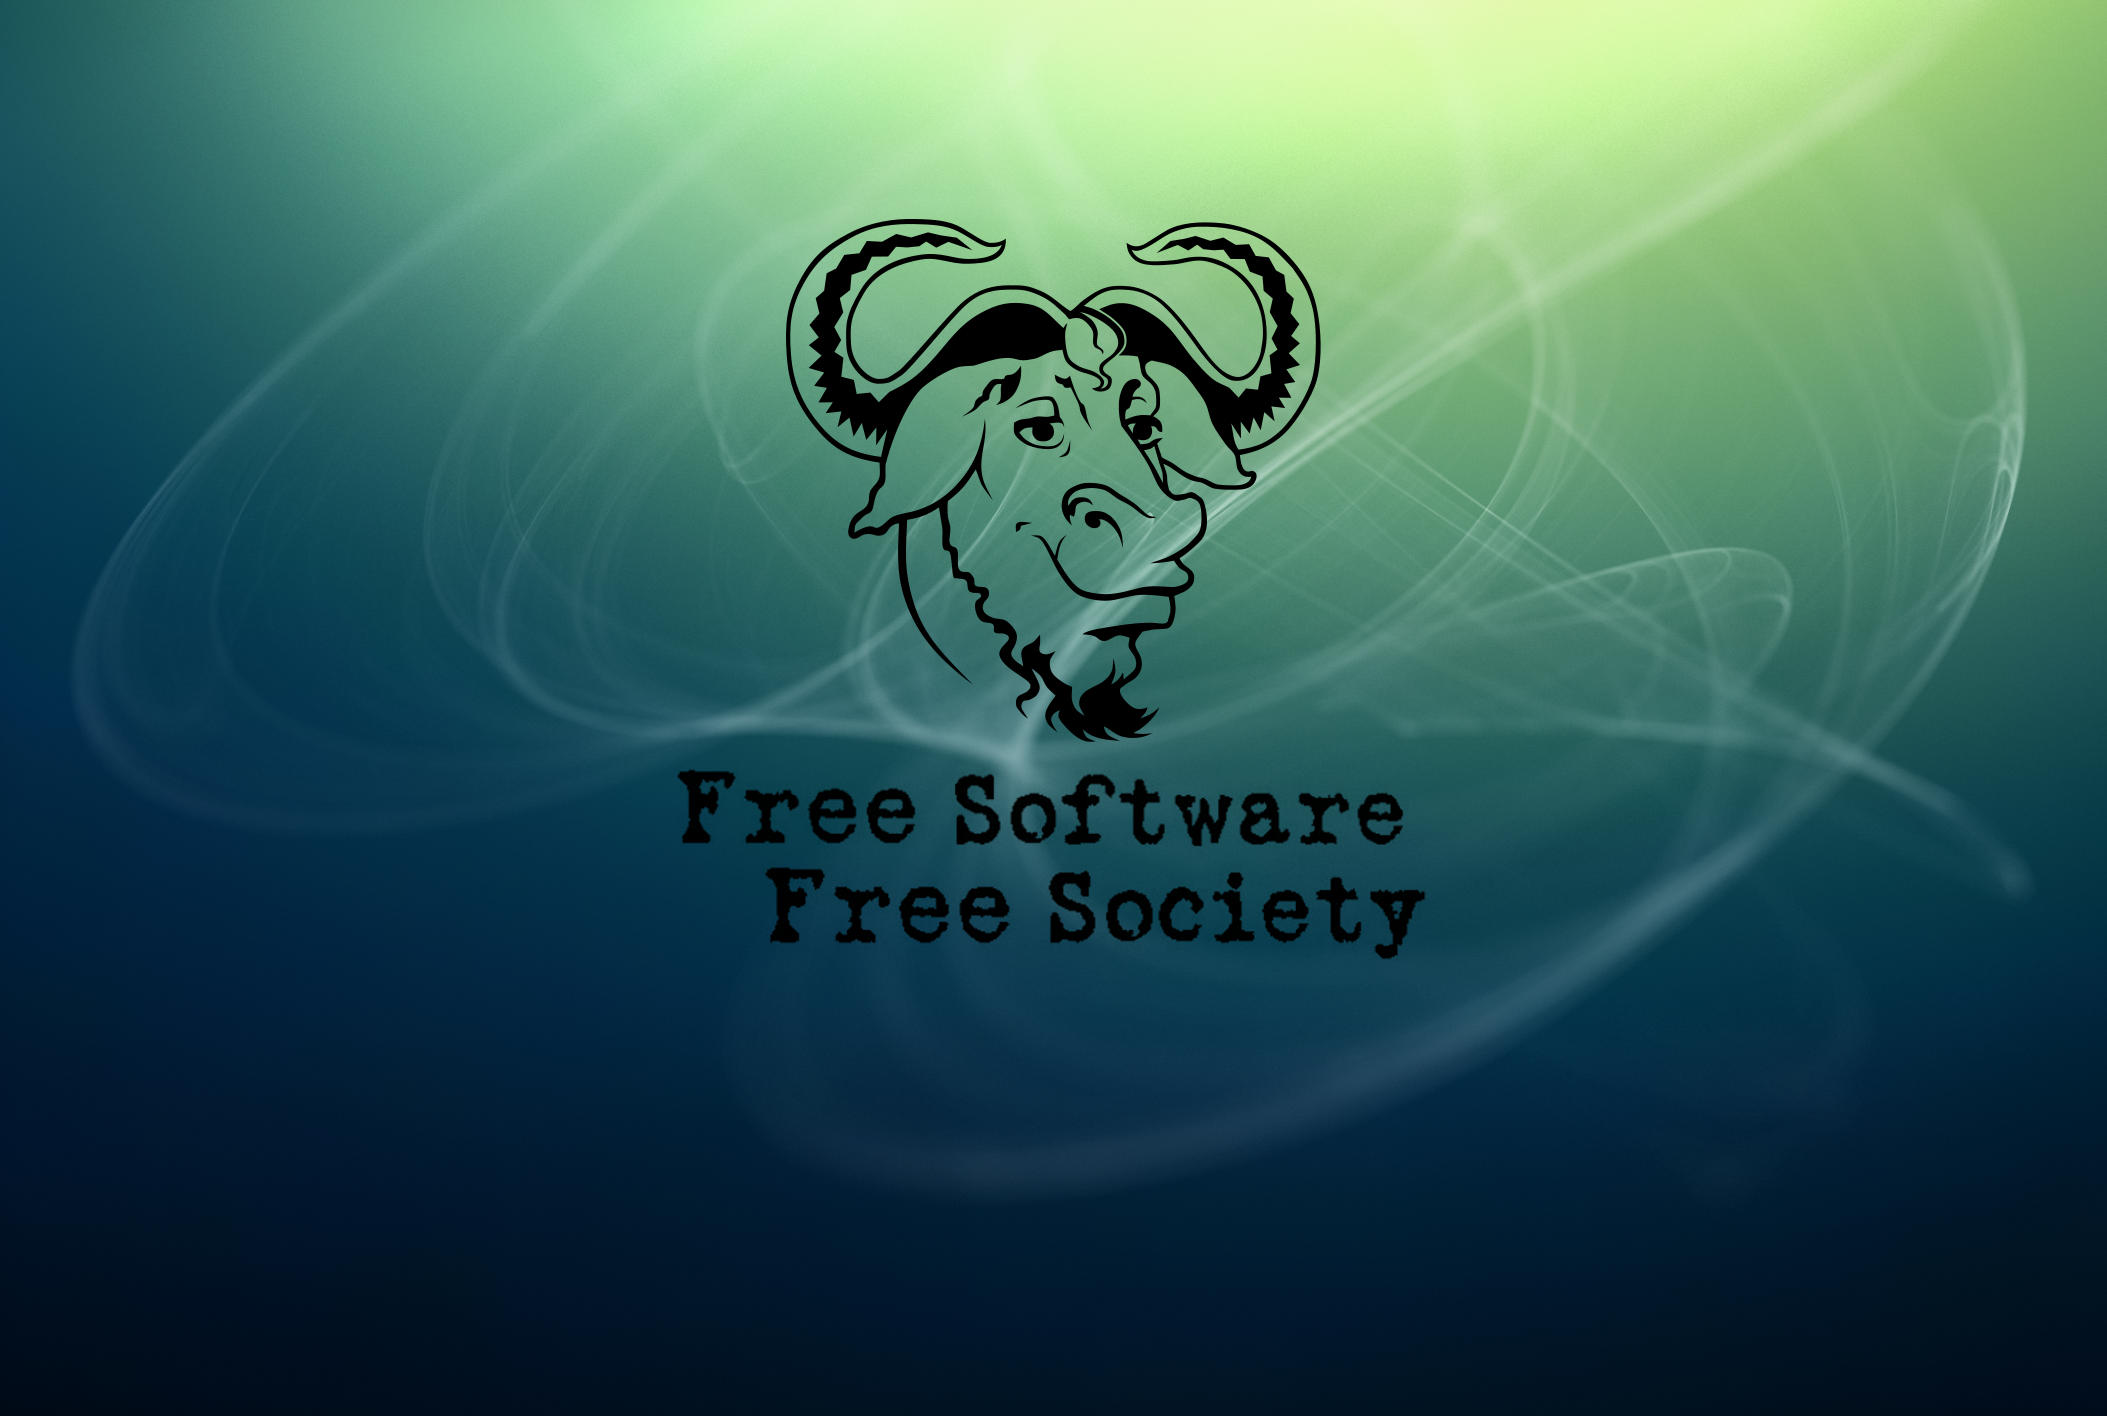 Free Software Wallpaper by Skwid Source Files